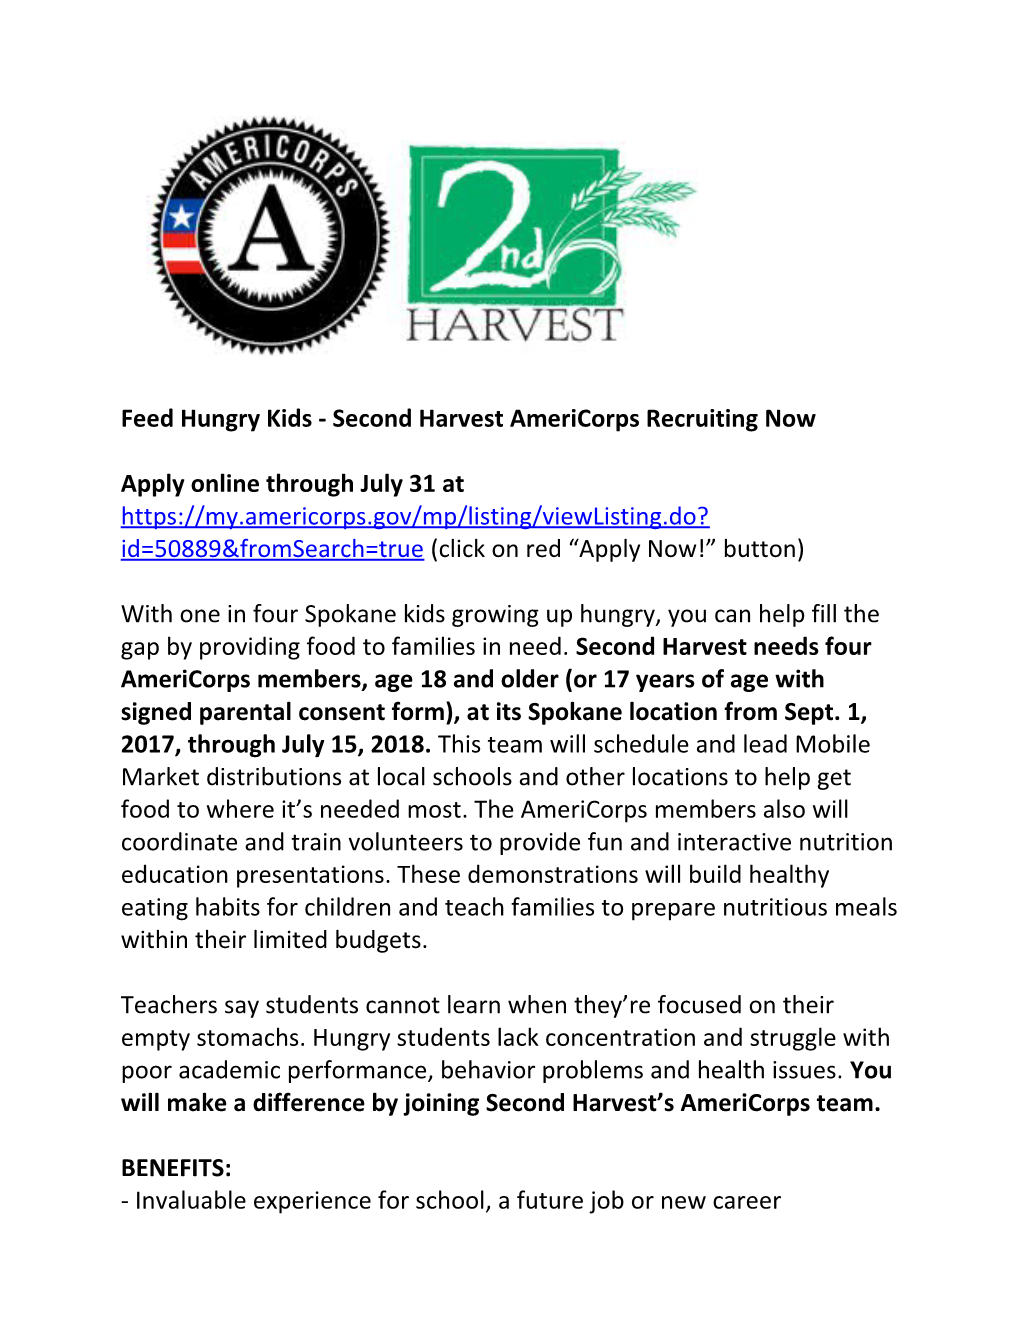 Feed Hungry Kids - Second Harvest Americorps Recruiting Now